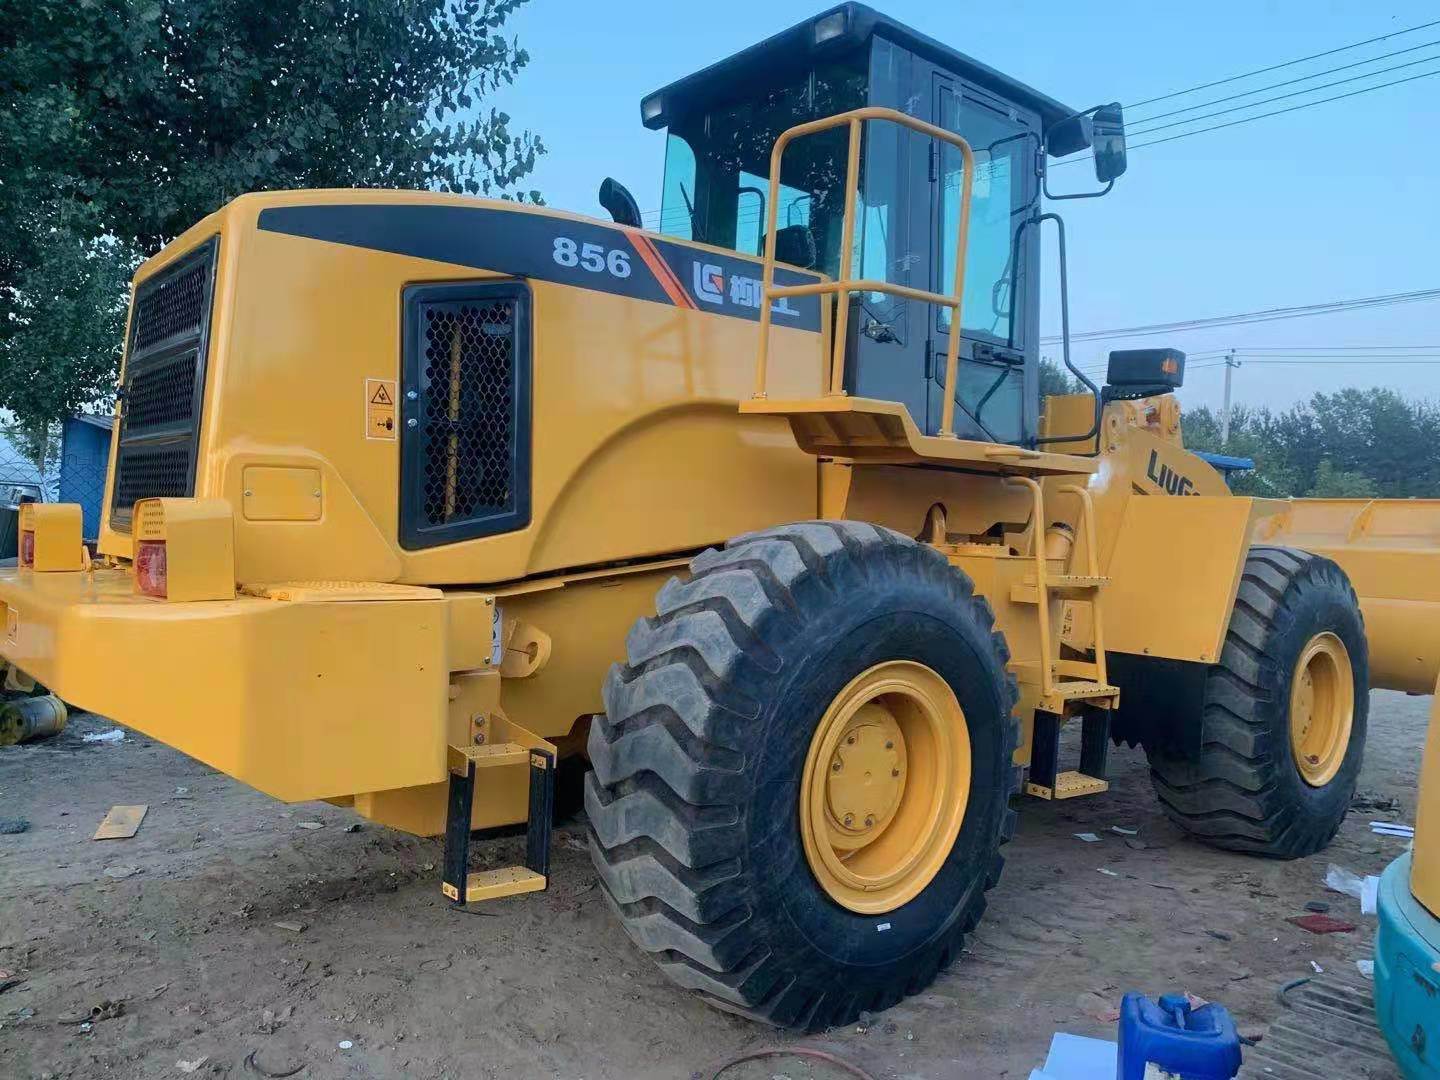 Used Liugong 856 Wheel Loader in New Condition